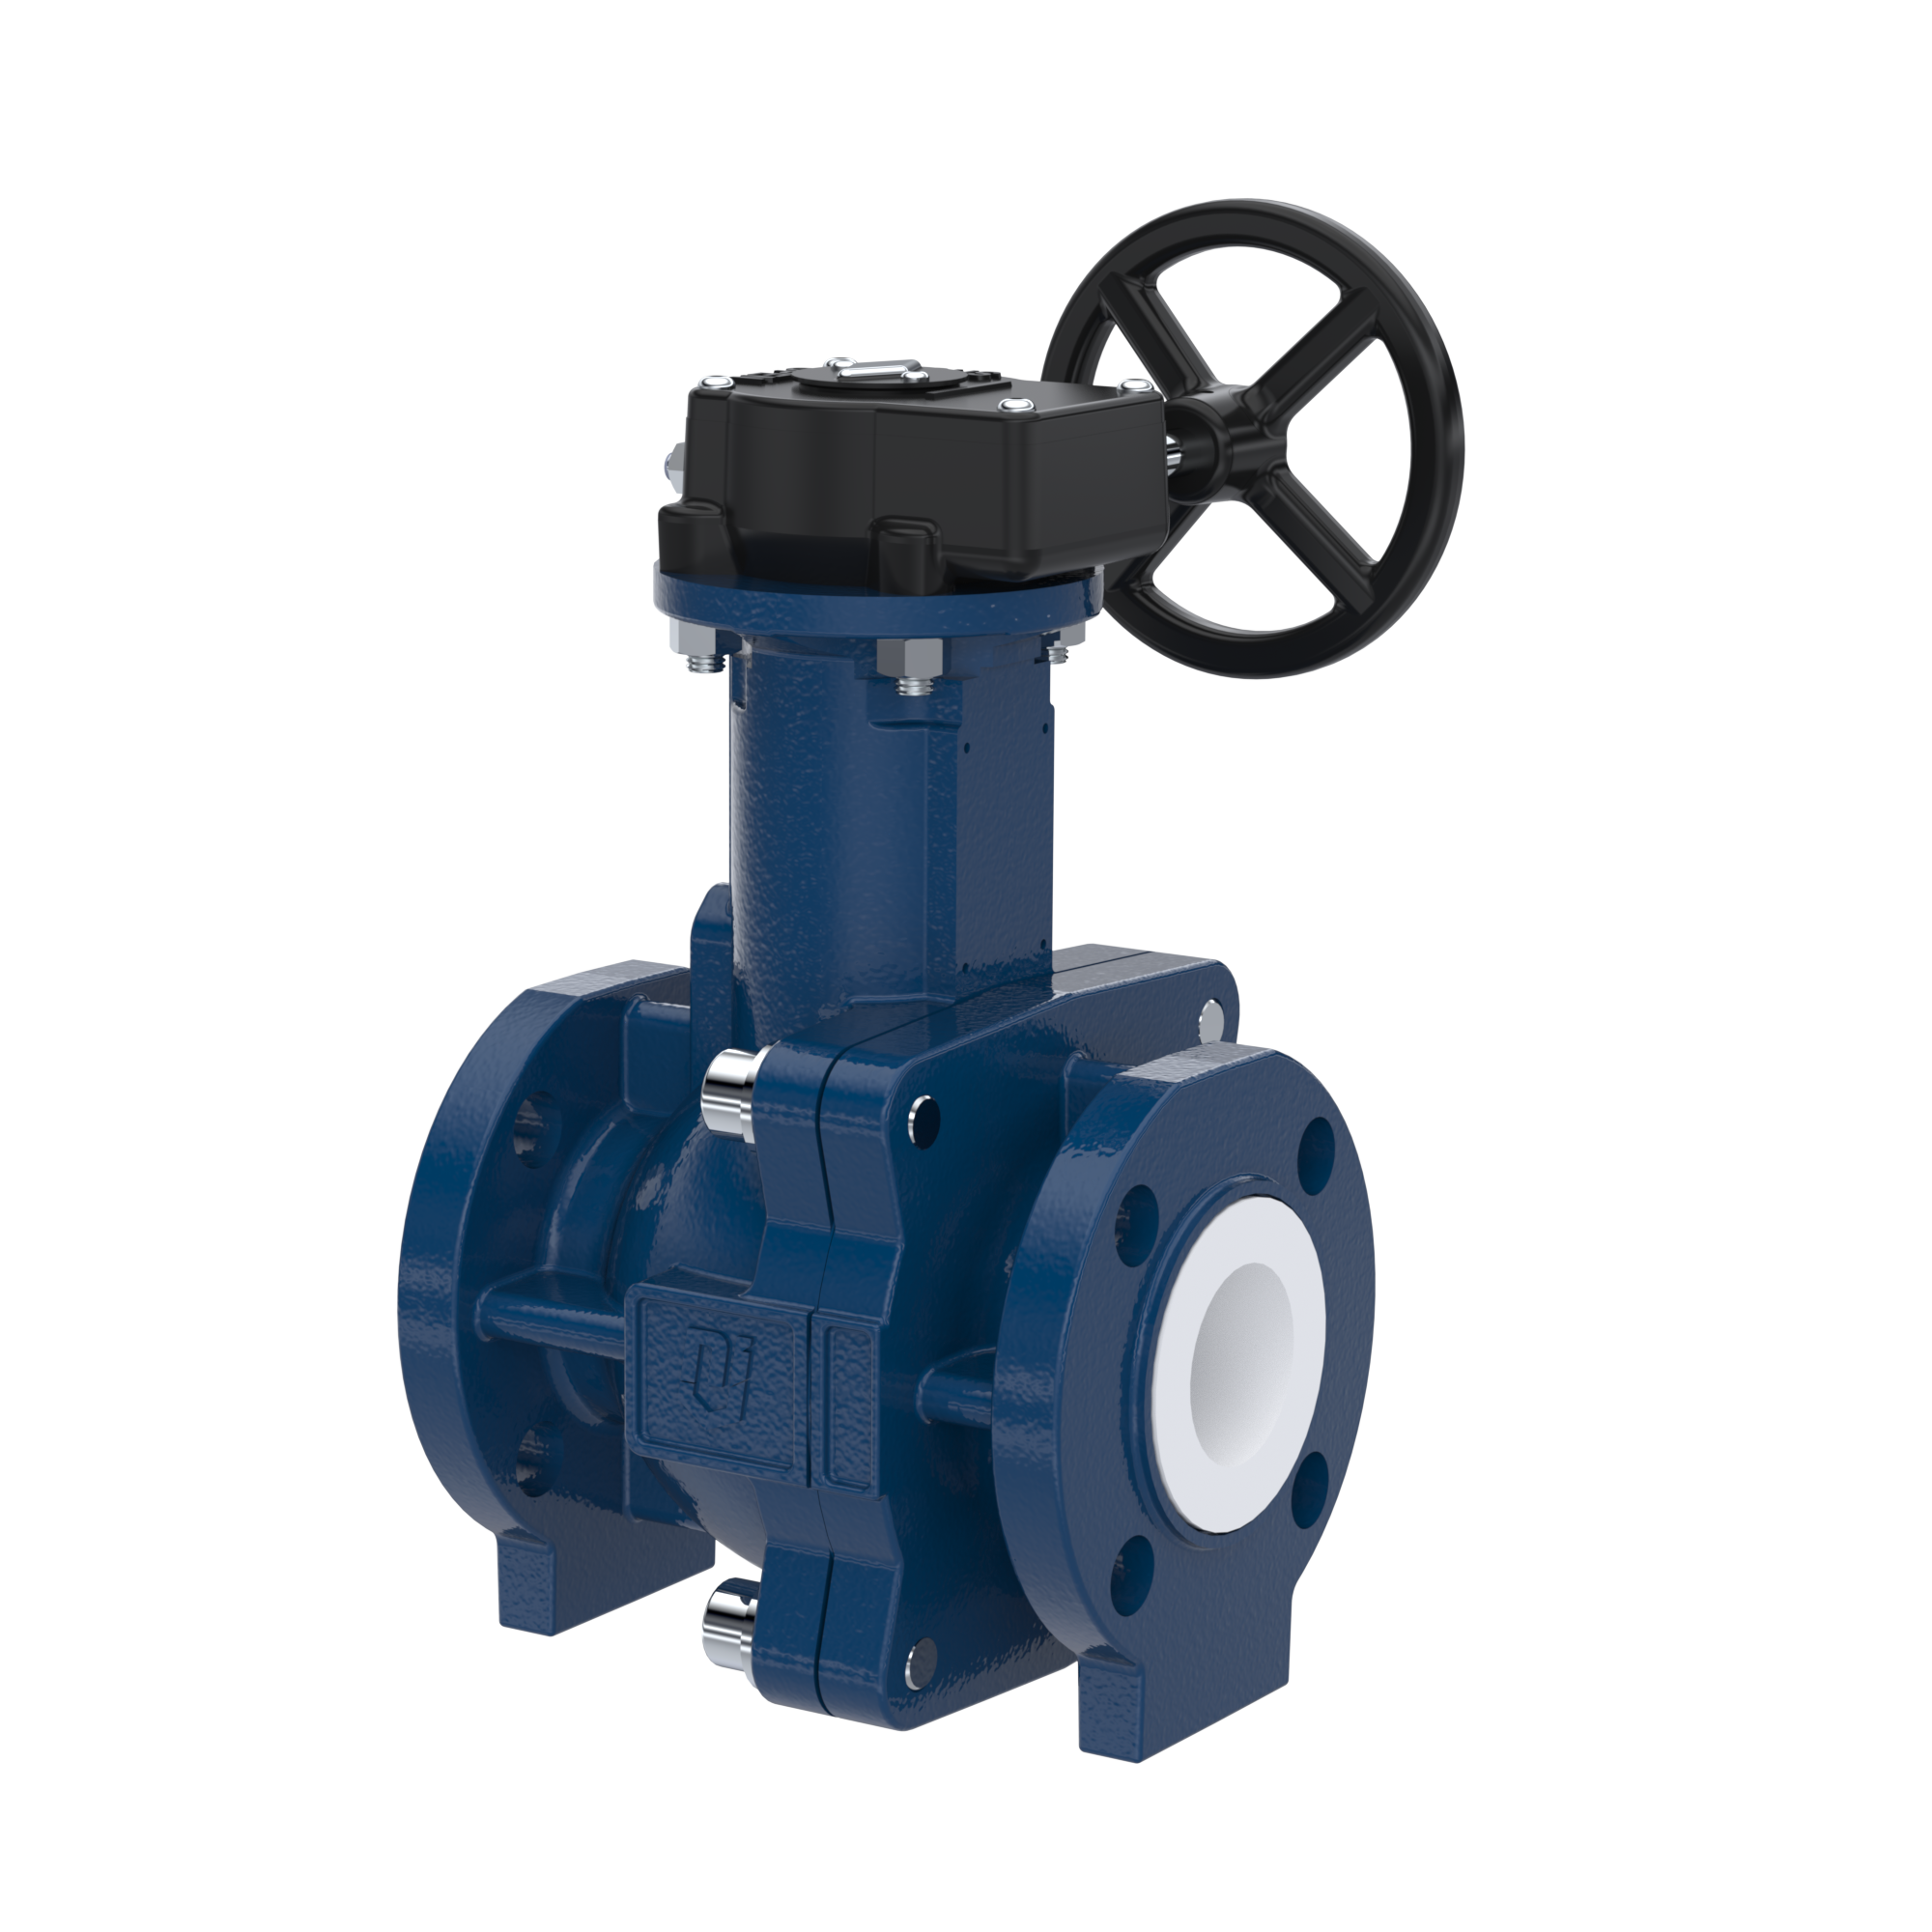 PFA-flange ball valve FK13 DN20 - 3/4" inch ANSI 150 made of spheroidal graphite cast iron with worm gear